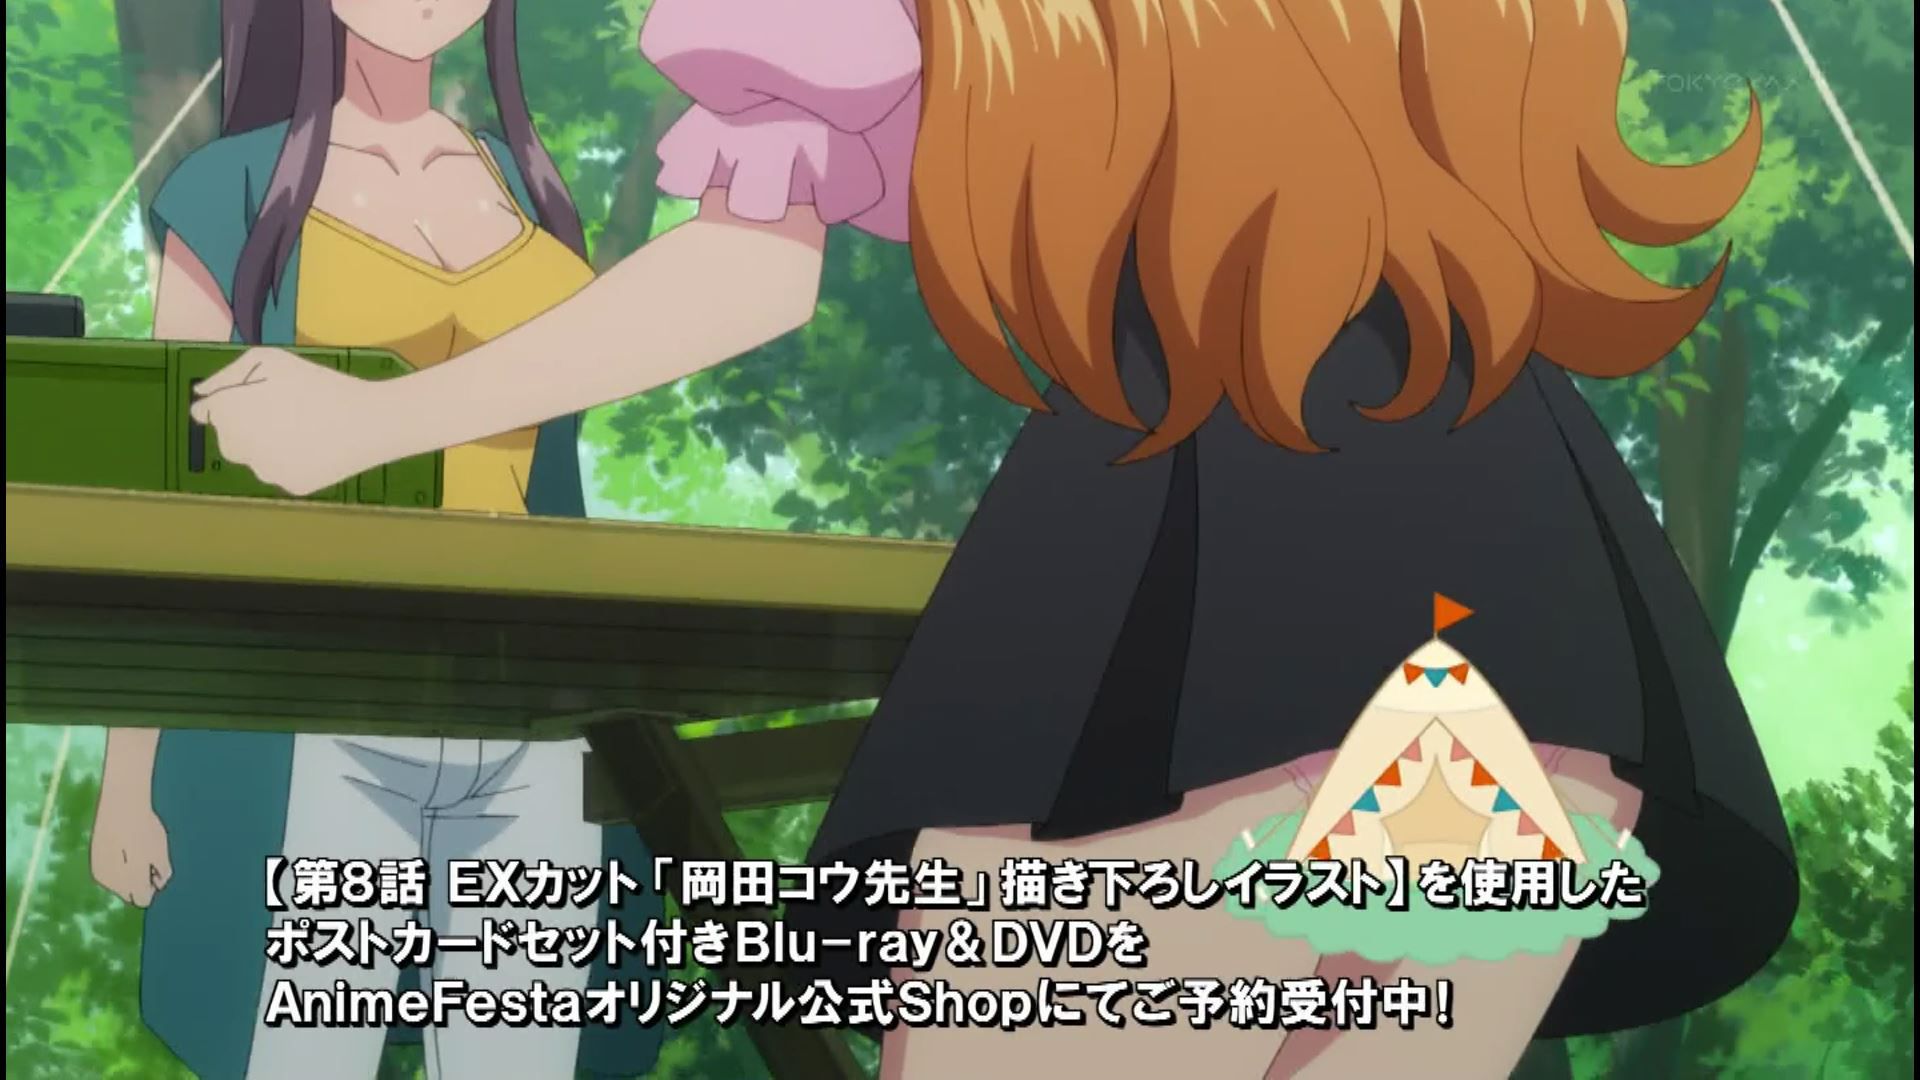 In episode 8 of the anime "Harlem Kyampu!" everyone hugged something, the harem camp was completed and ended 8